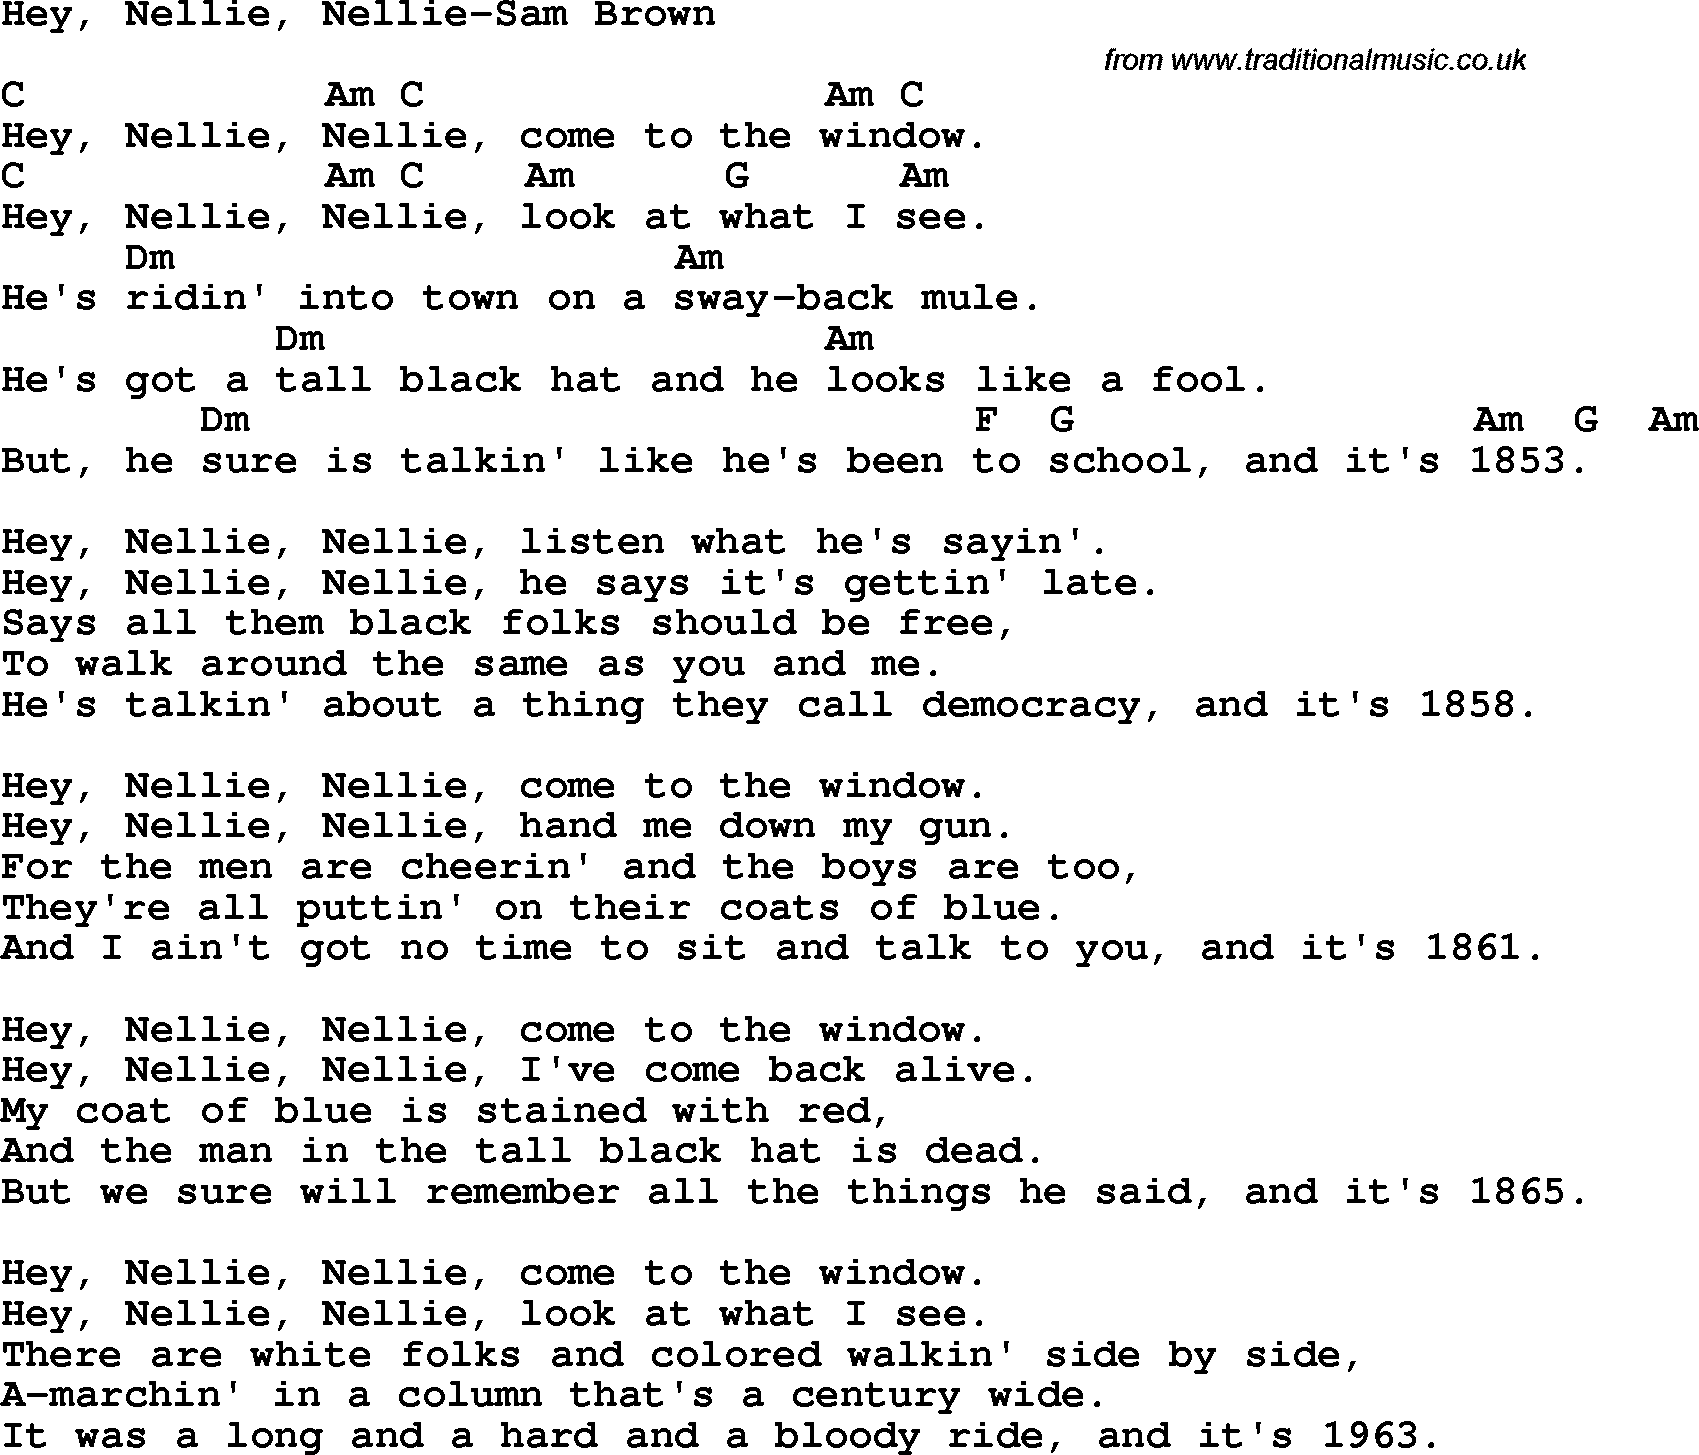 Protest Song Hey, Nellie, Nellie-Sam Brown lyrics and chords